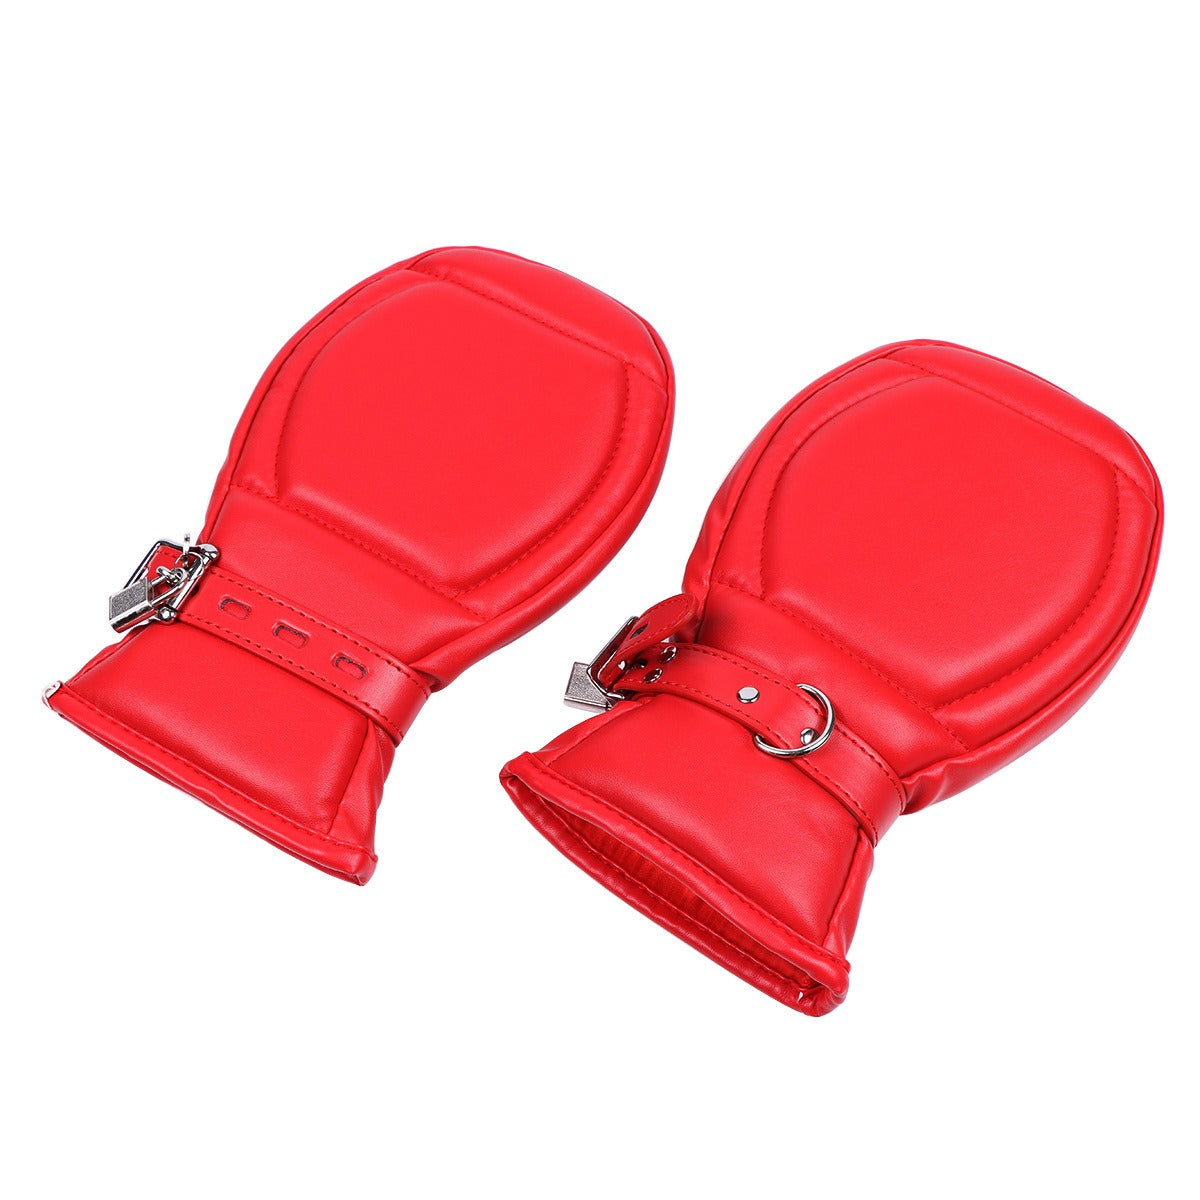 PADDED PUP PAW LOCKABLE MITTS - Red